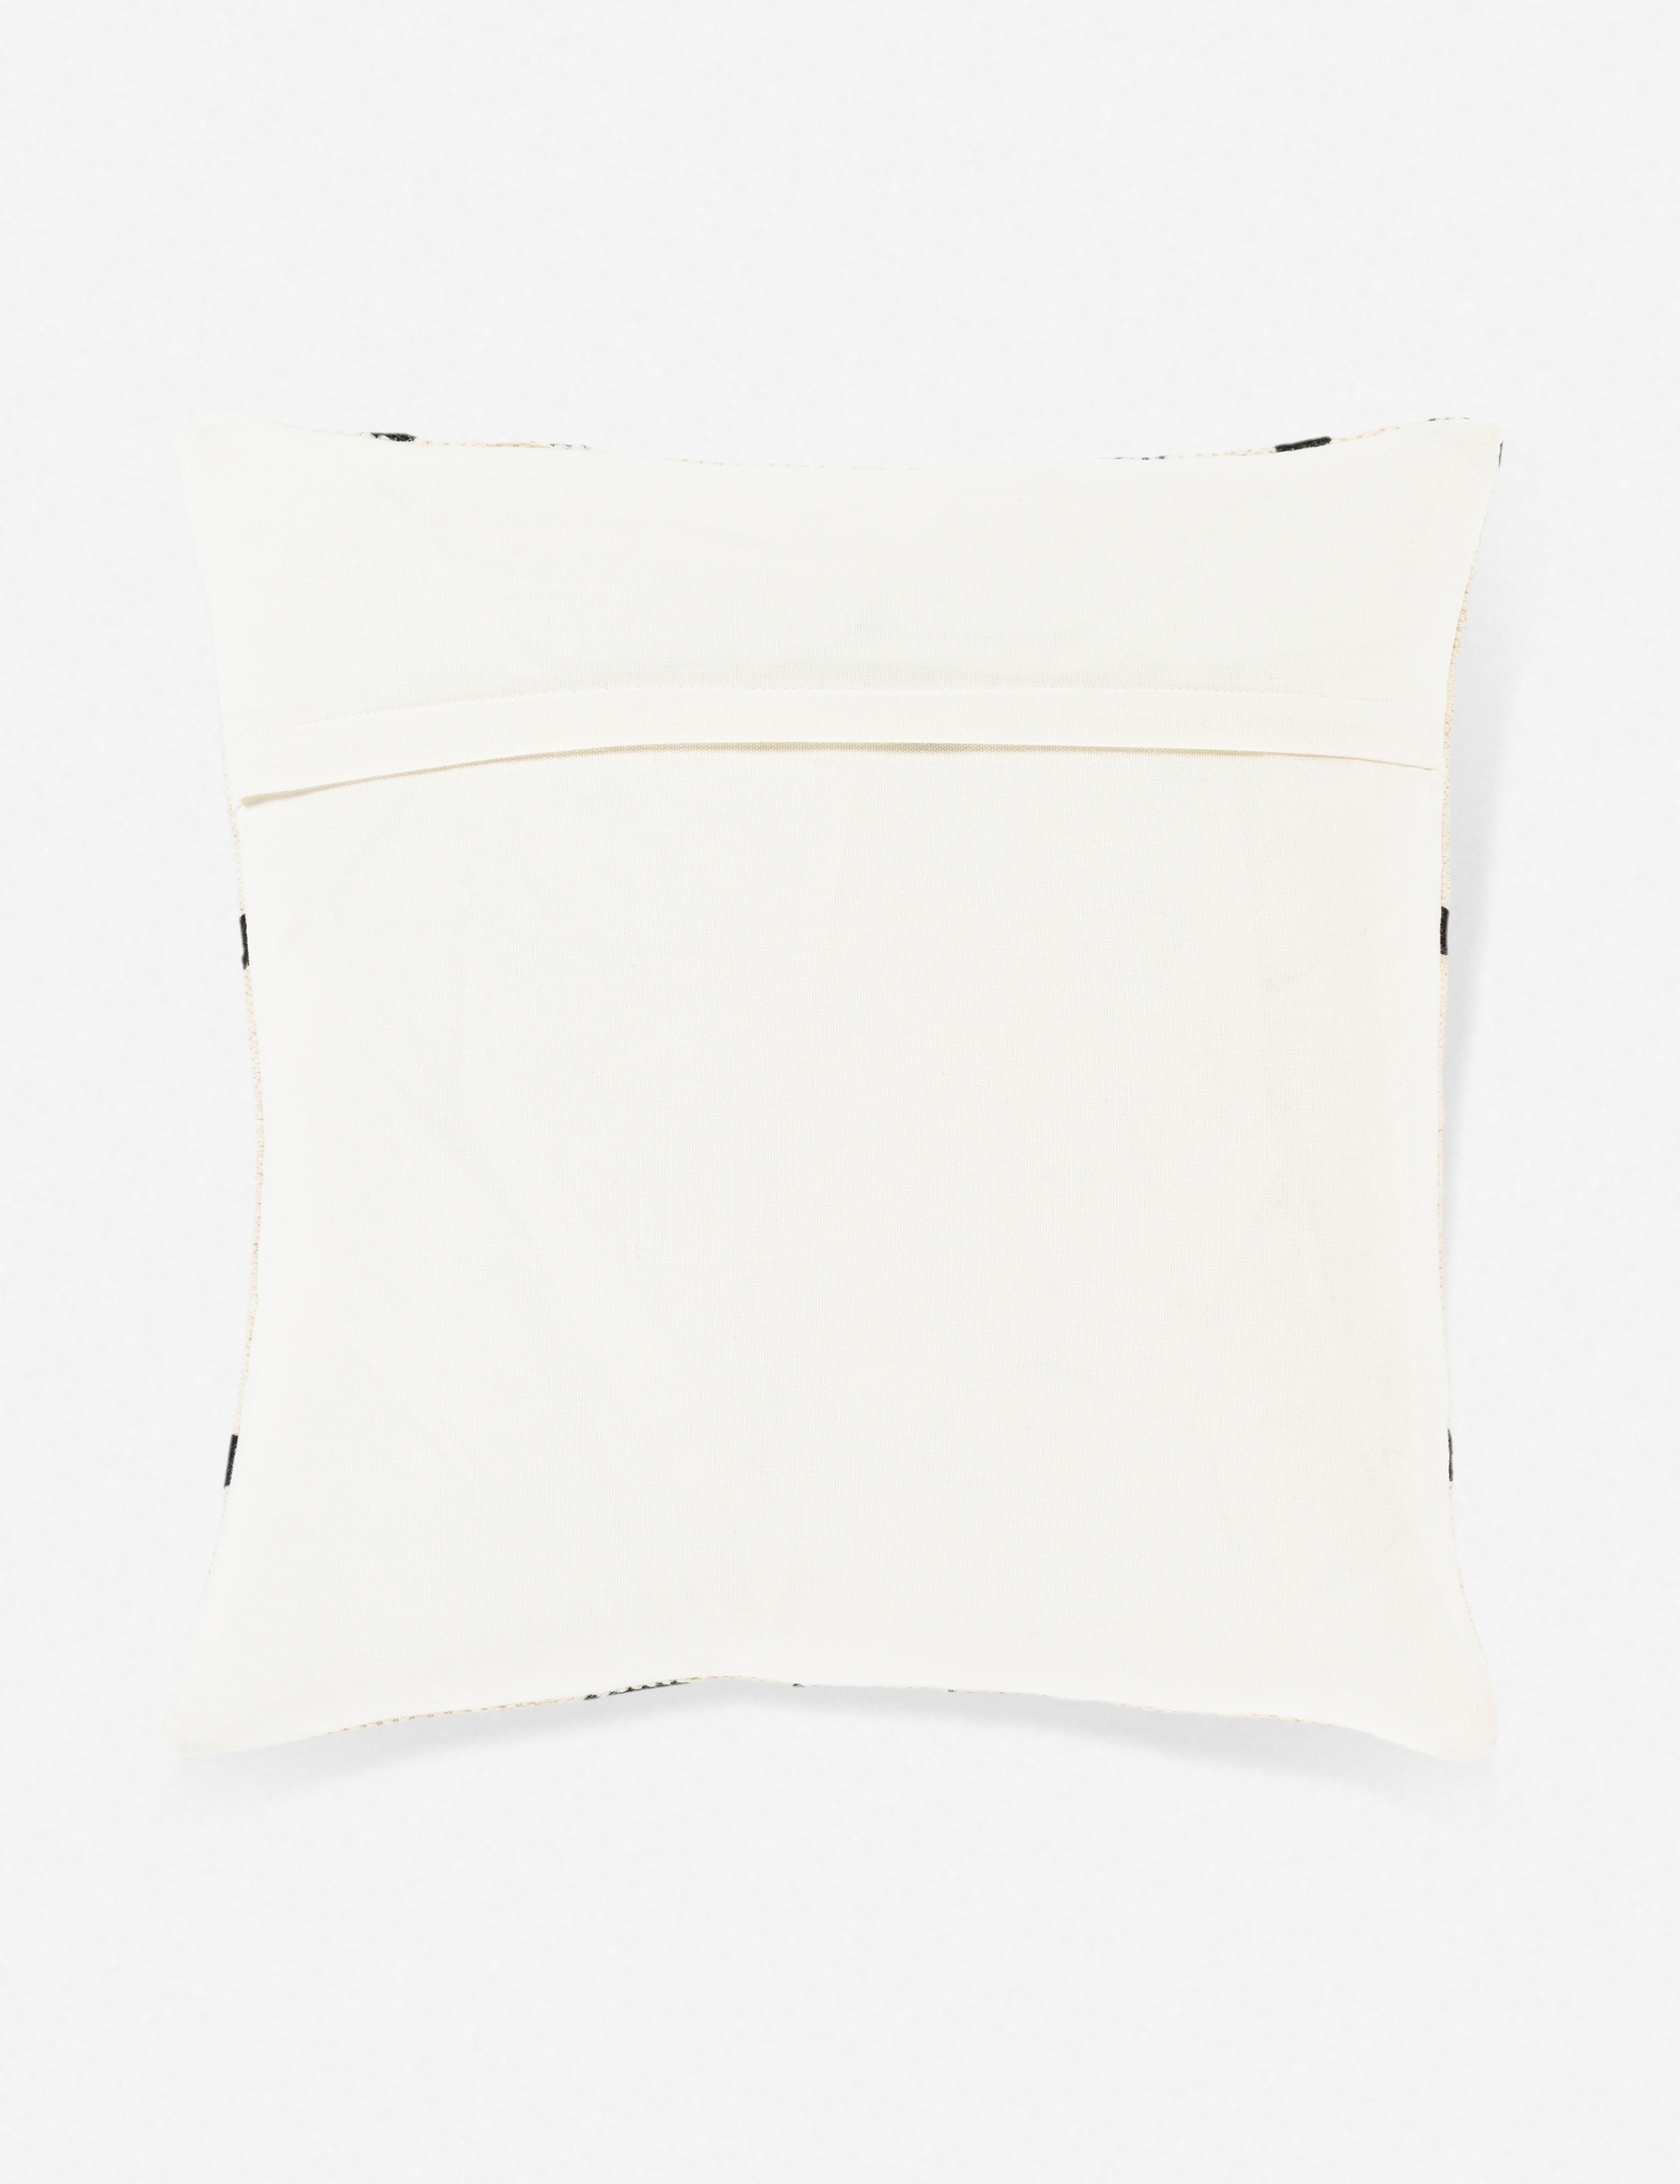 Marvella Pillow, Black and Ivory 20" x 20" - Image 1